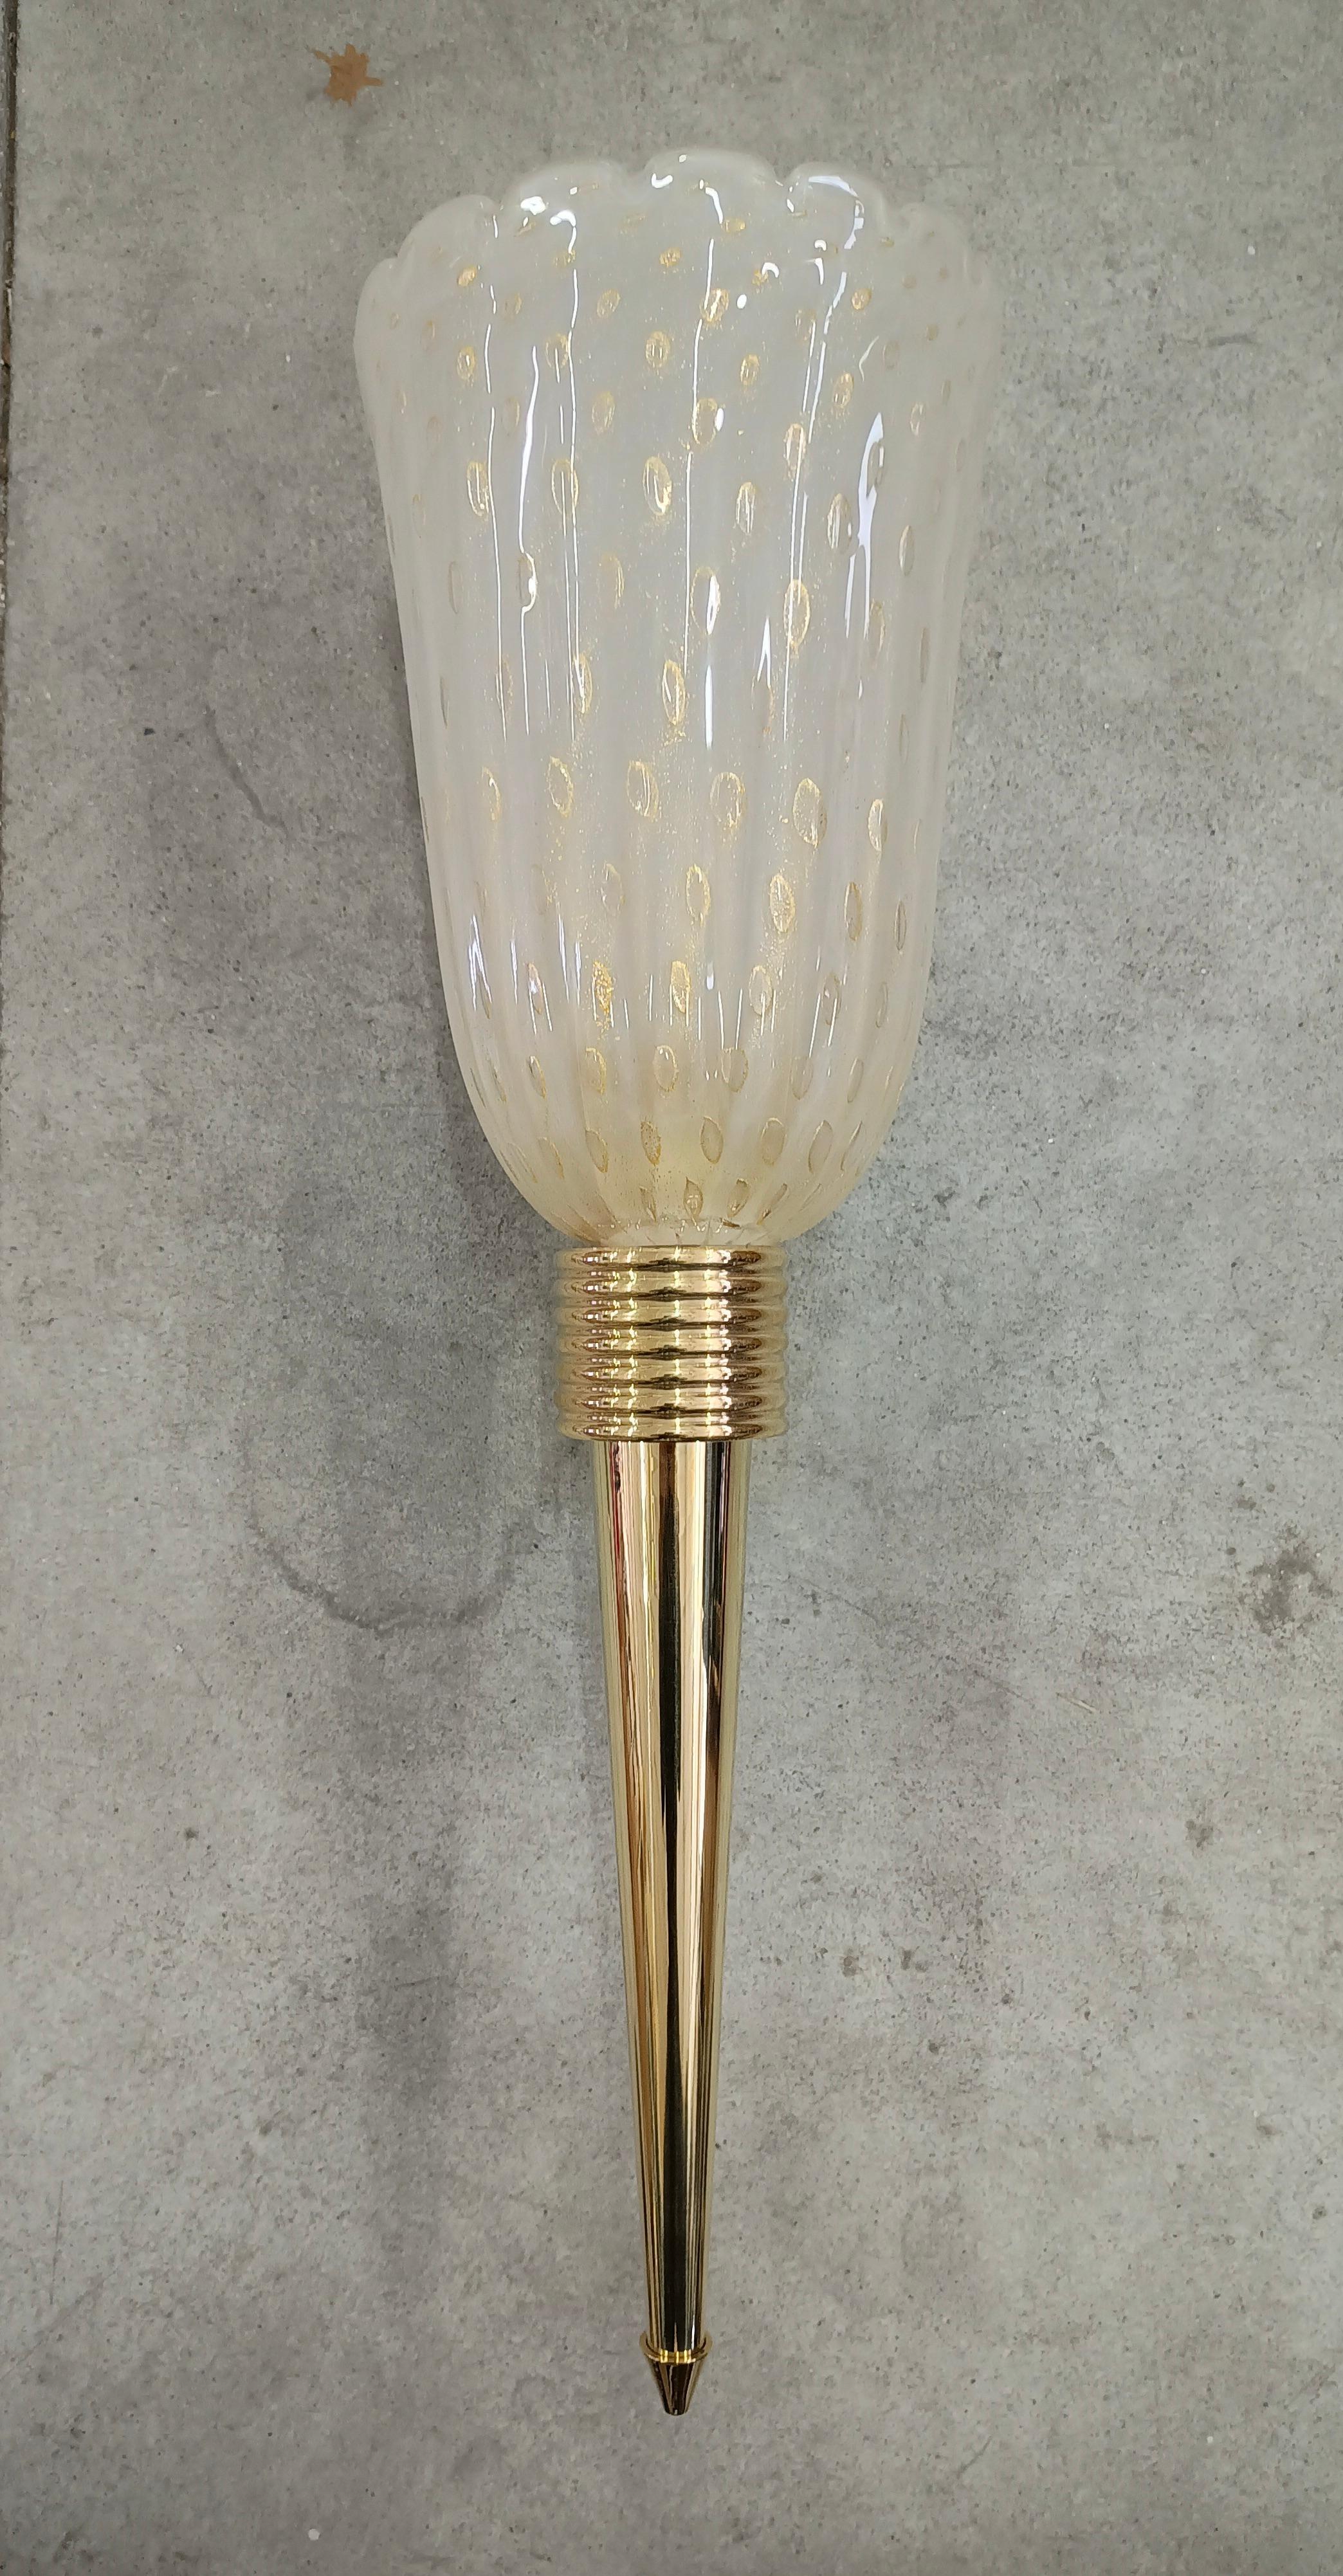 Refined and delicate design for this wall light in white and gold Murano glass with 